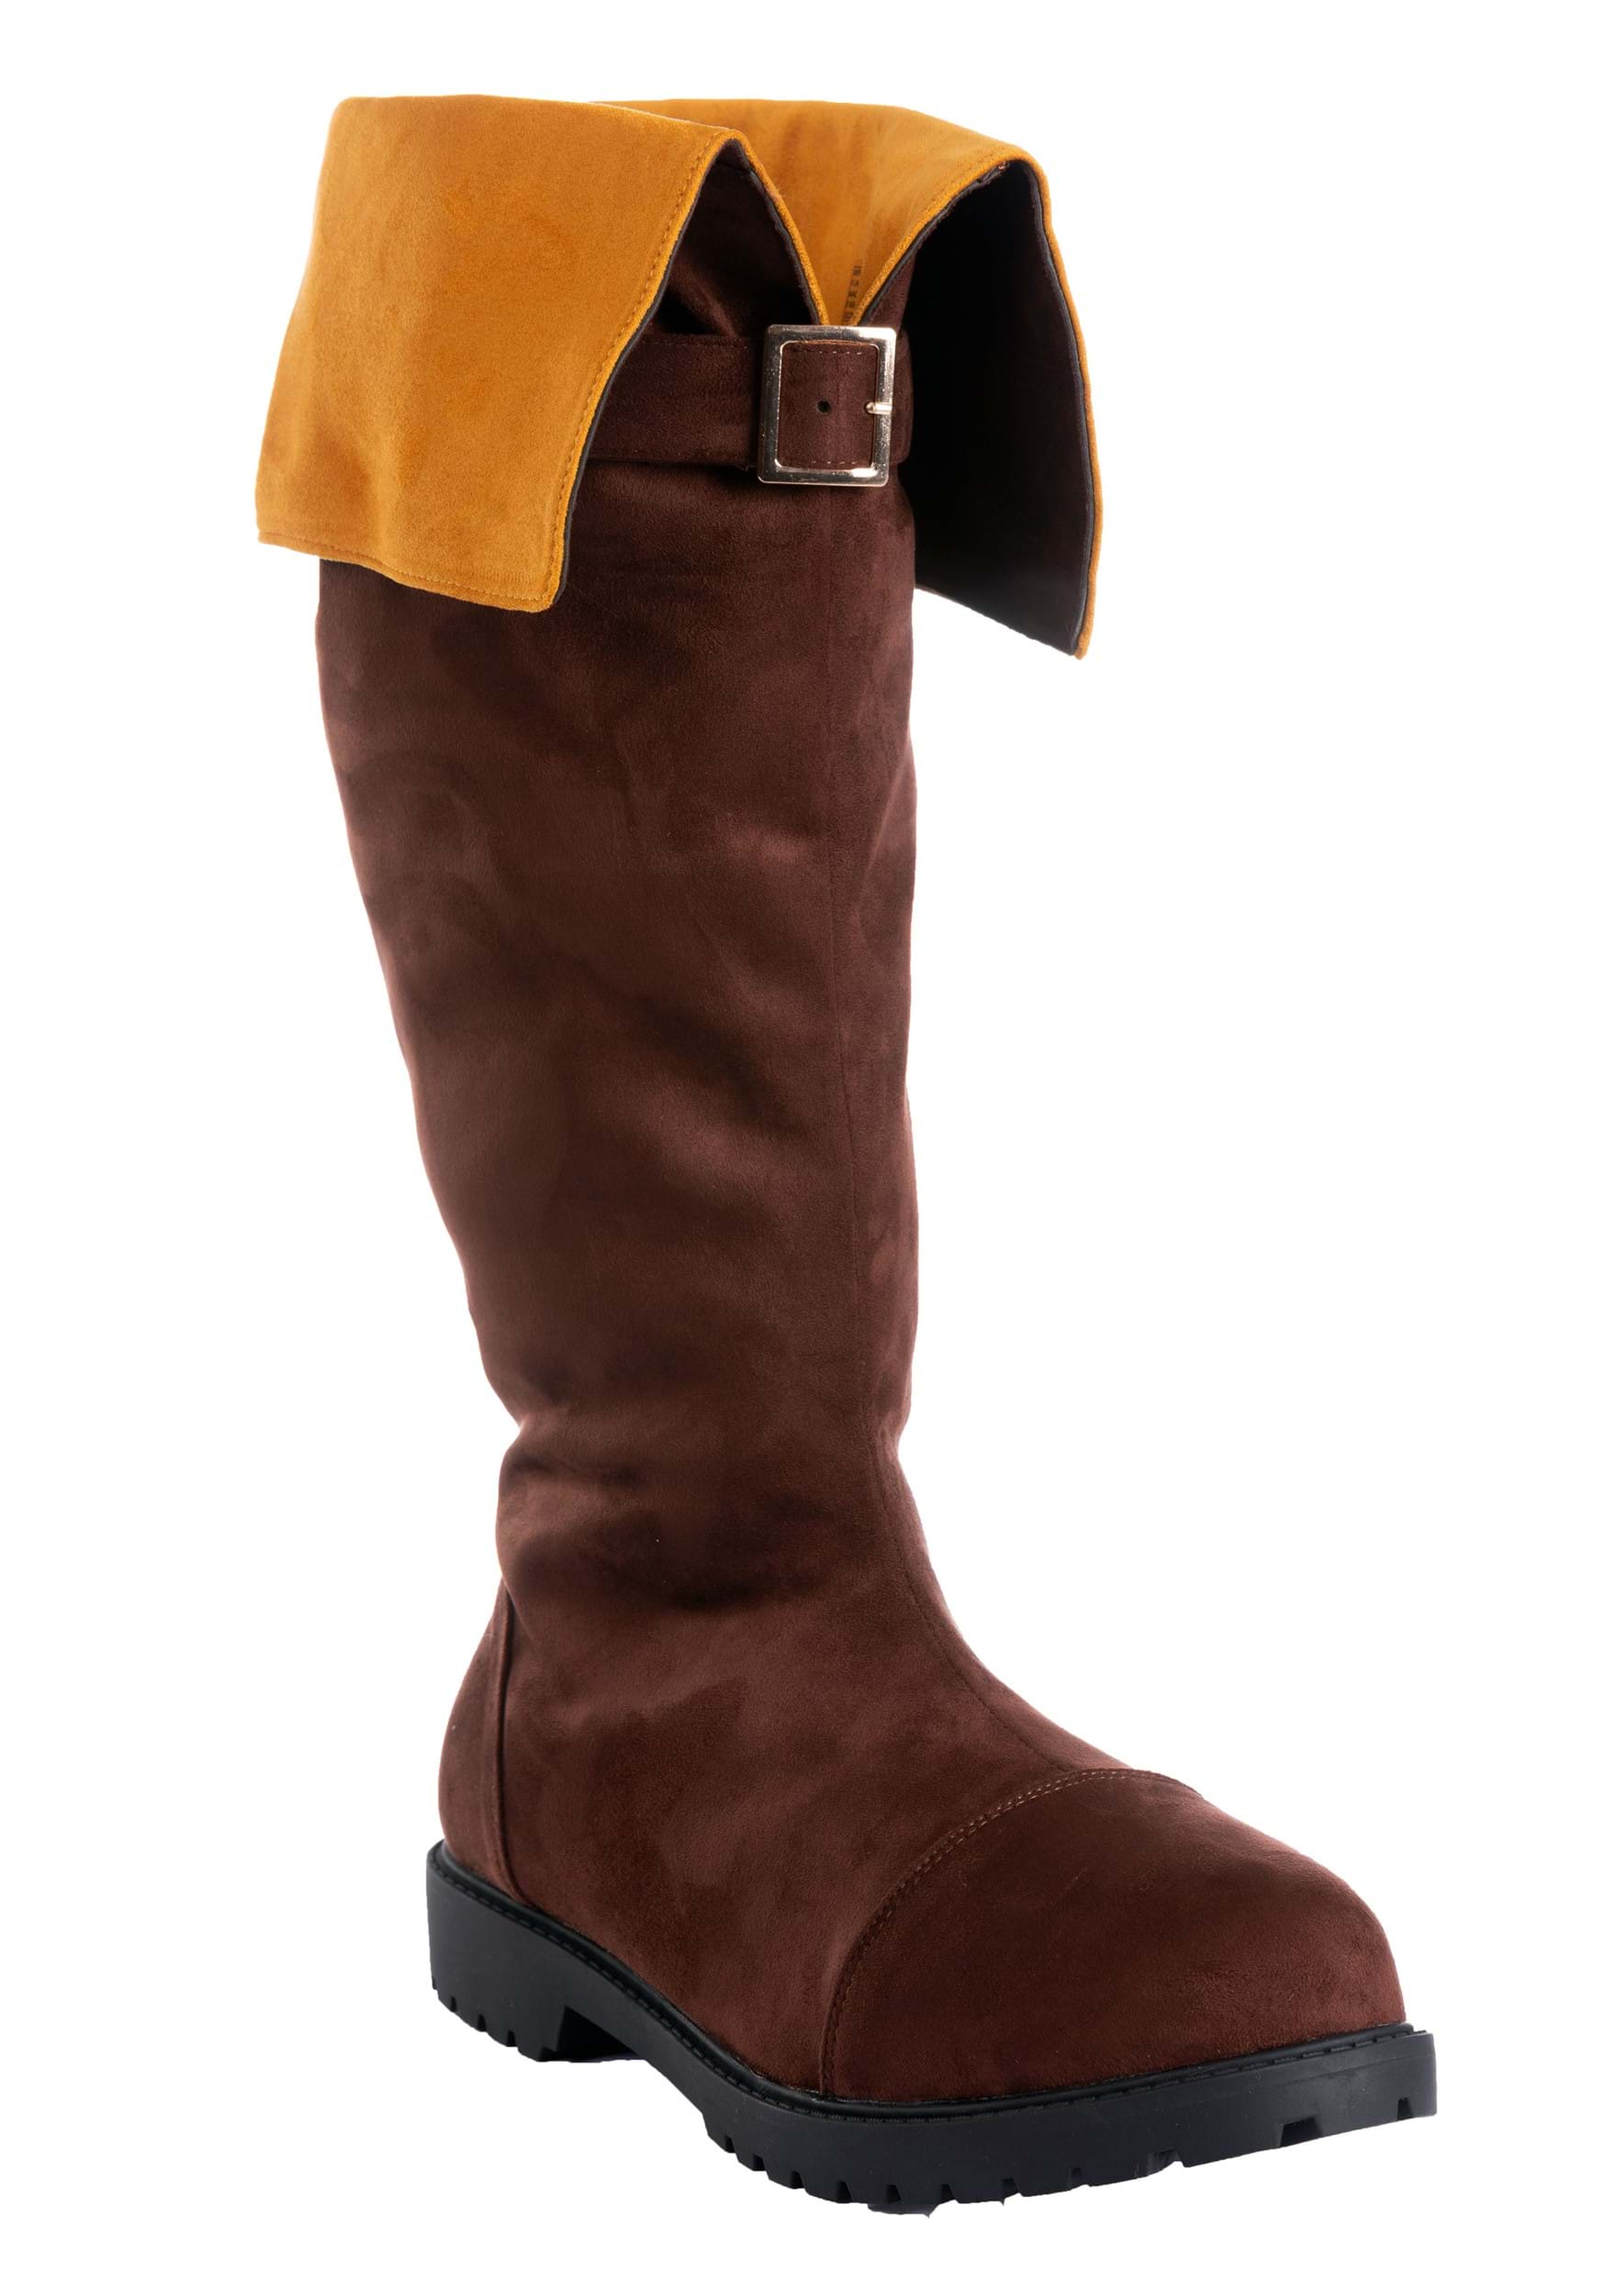 Over The Knee Boots in a Fall Wonderland, The Sweetest Thing